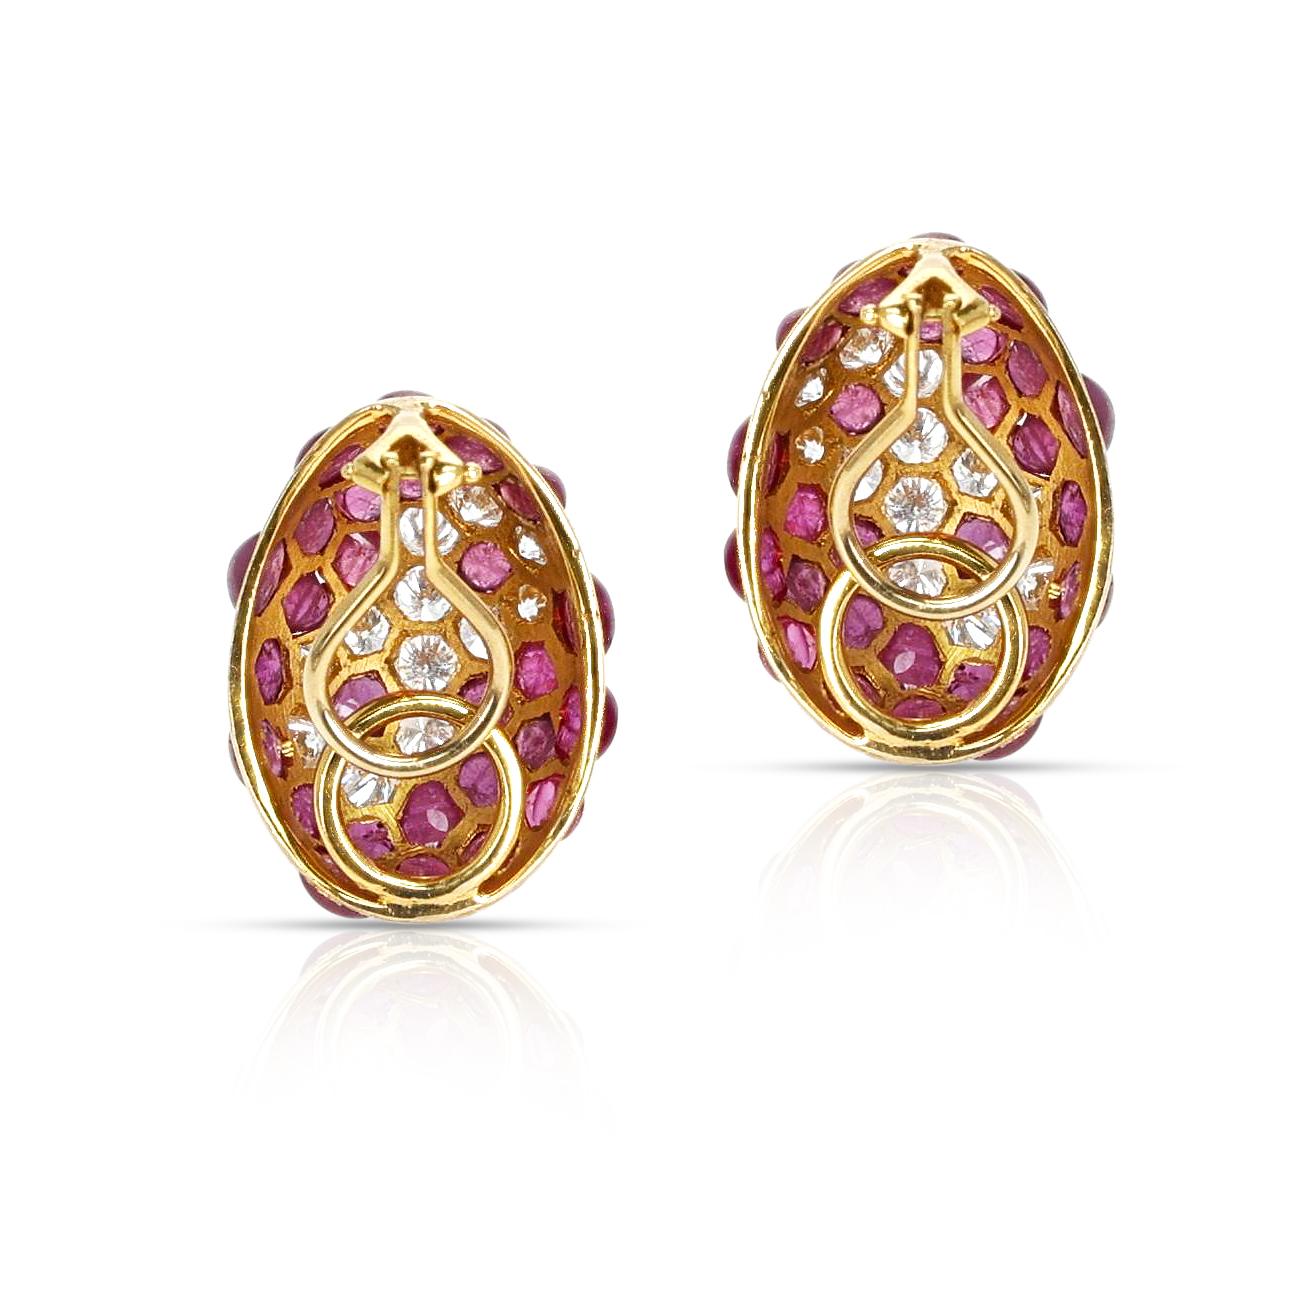 17 Ct. Ruby Cabochon and 4 Ct. Round Diamond Cluster Earrings, 18K In Excellent Condition For Sale In New York, NY